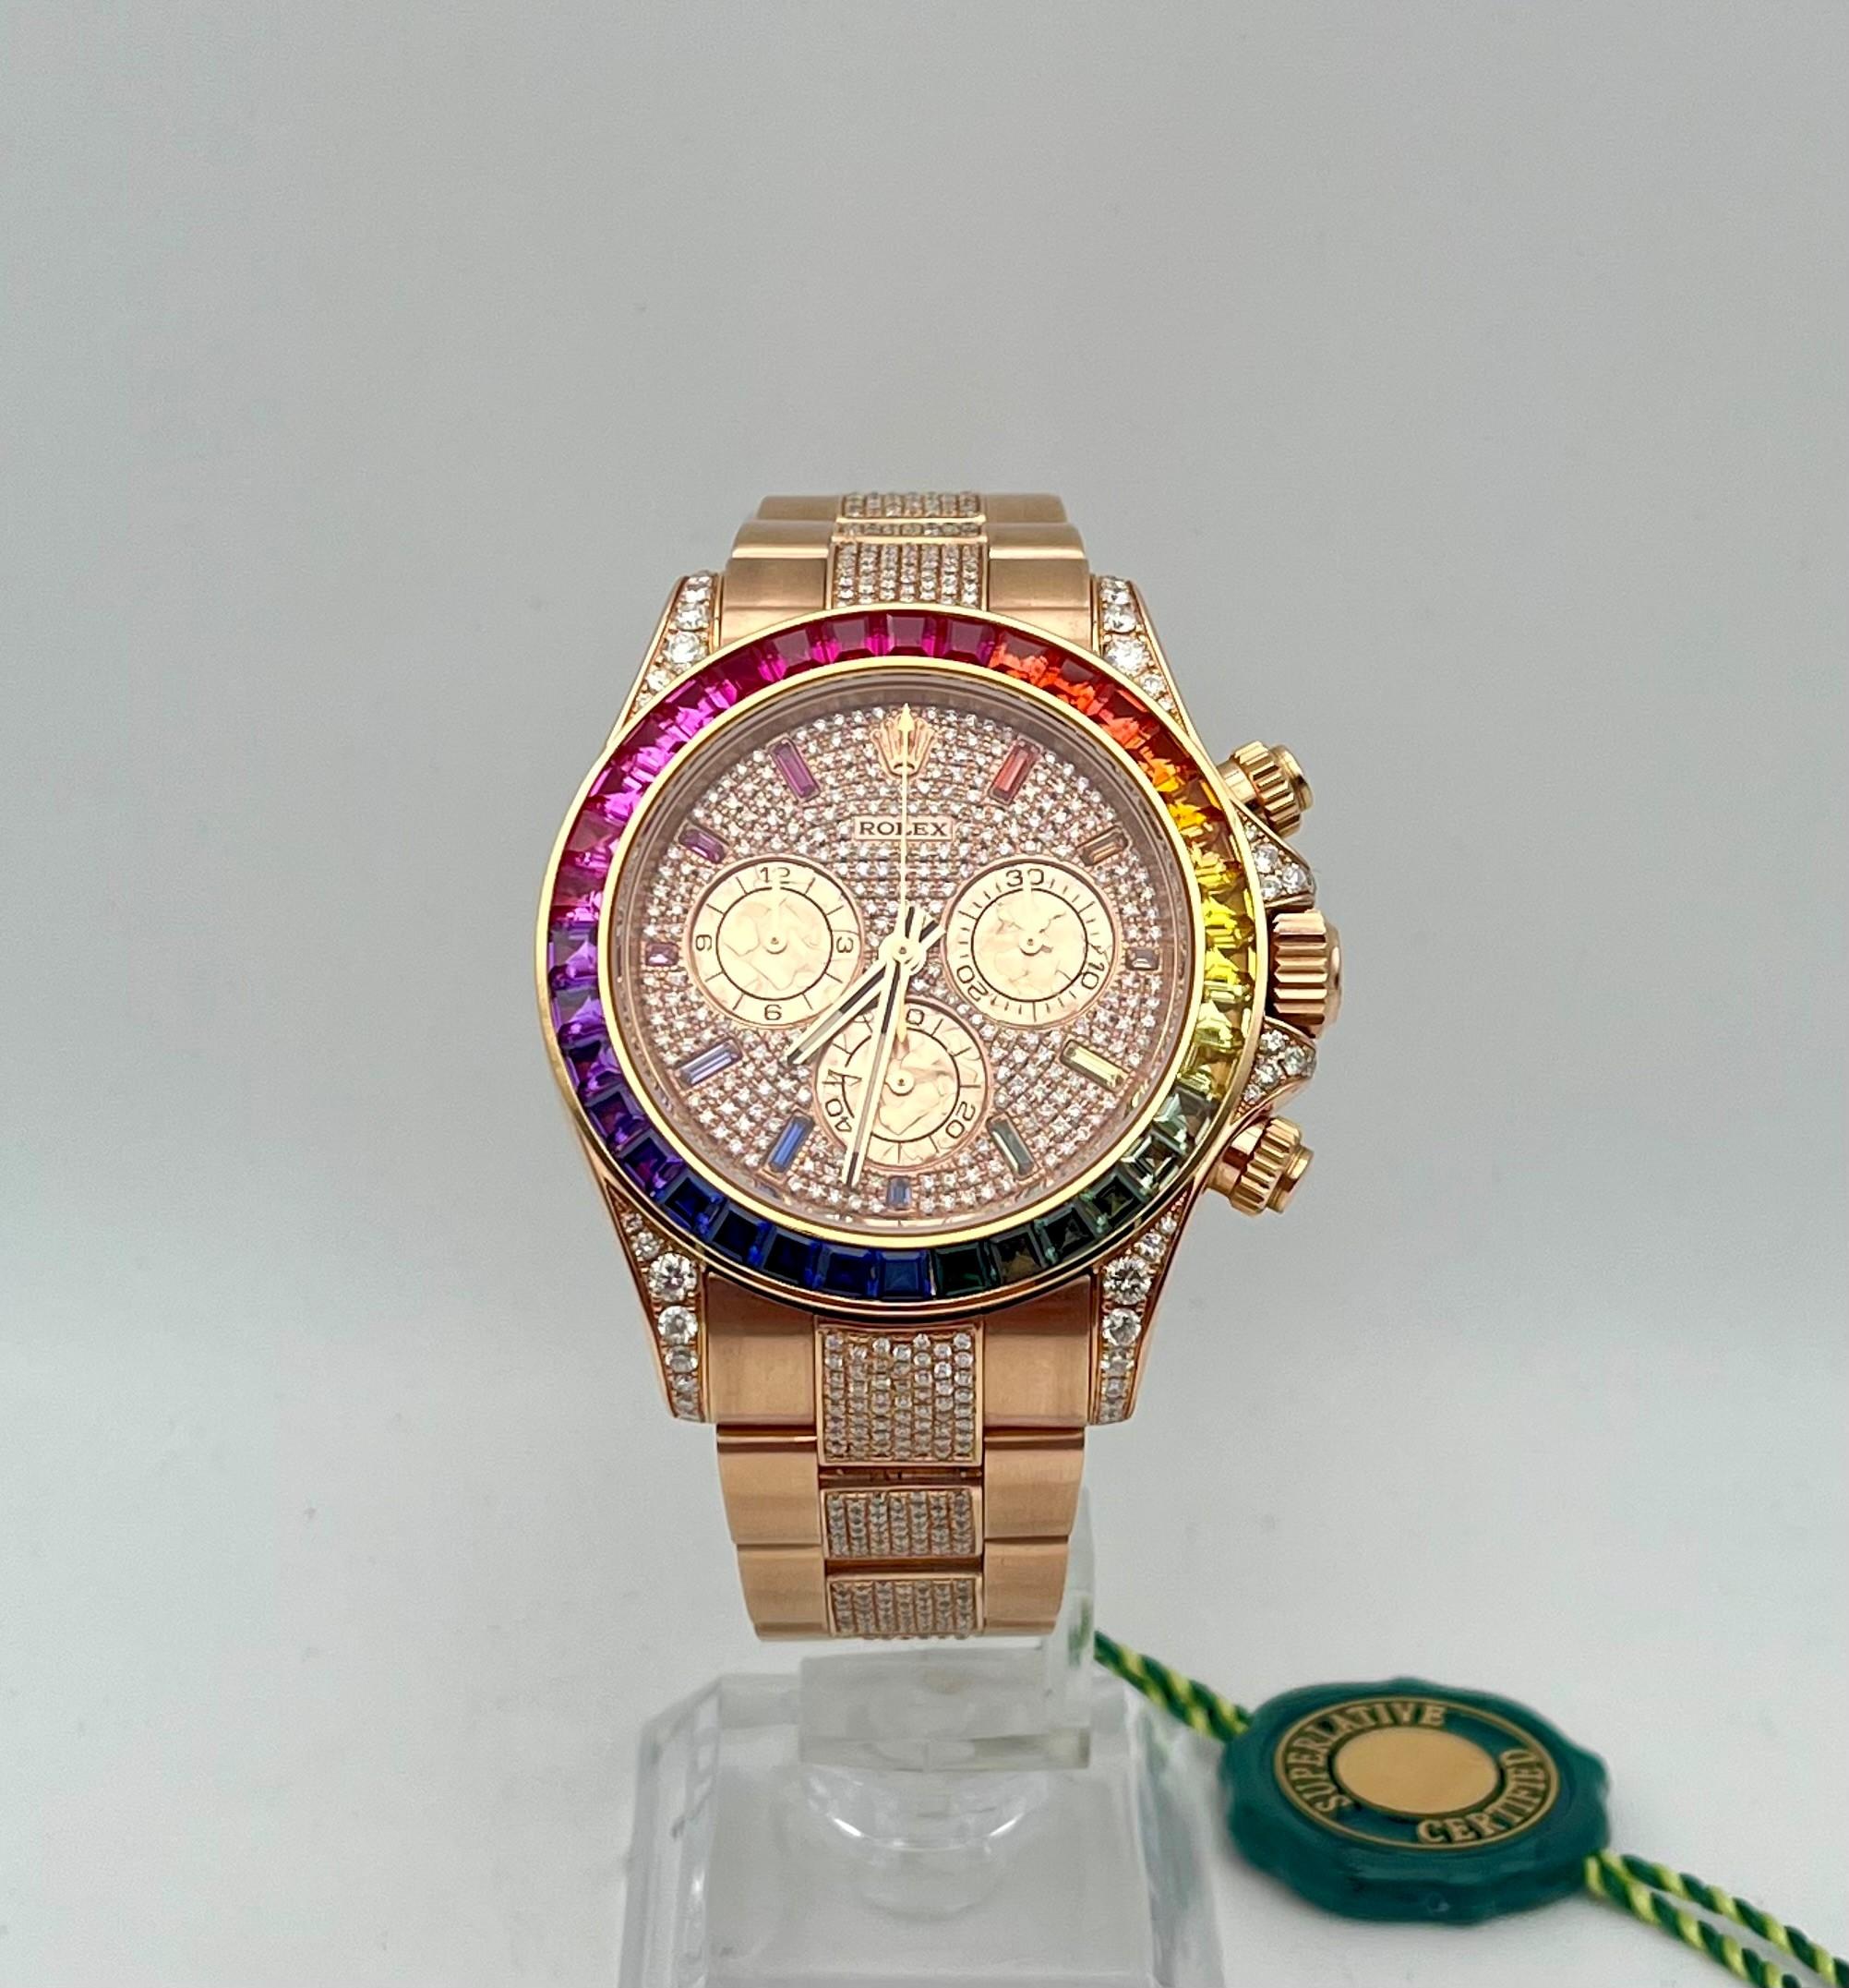 Rolex Cosmograph Daytona Everose rainbow aftermarket, with box and papers 2018
Model, Daytona 116505 ; Serial/Year. Current ; Case Diameter, 40mm ; Dial. Custom Diamond Dial Fixed bezel set with 36 rainbow colored baguette sapphires 

PRADERA is a